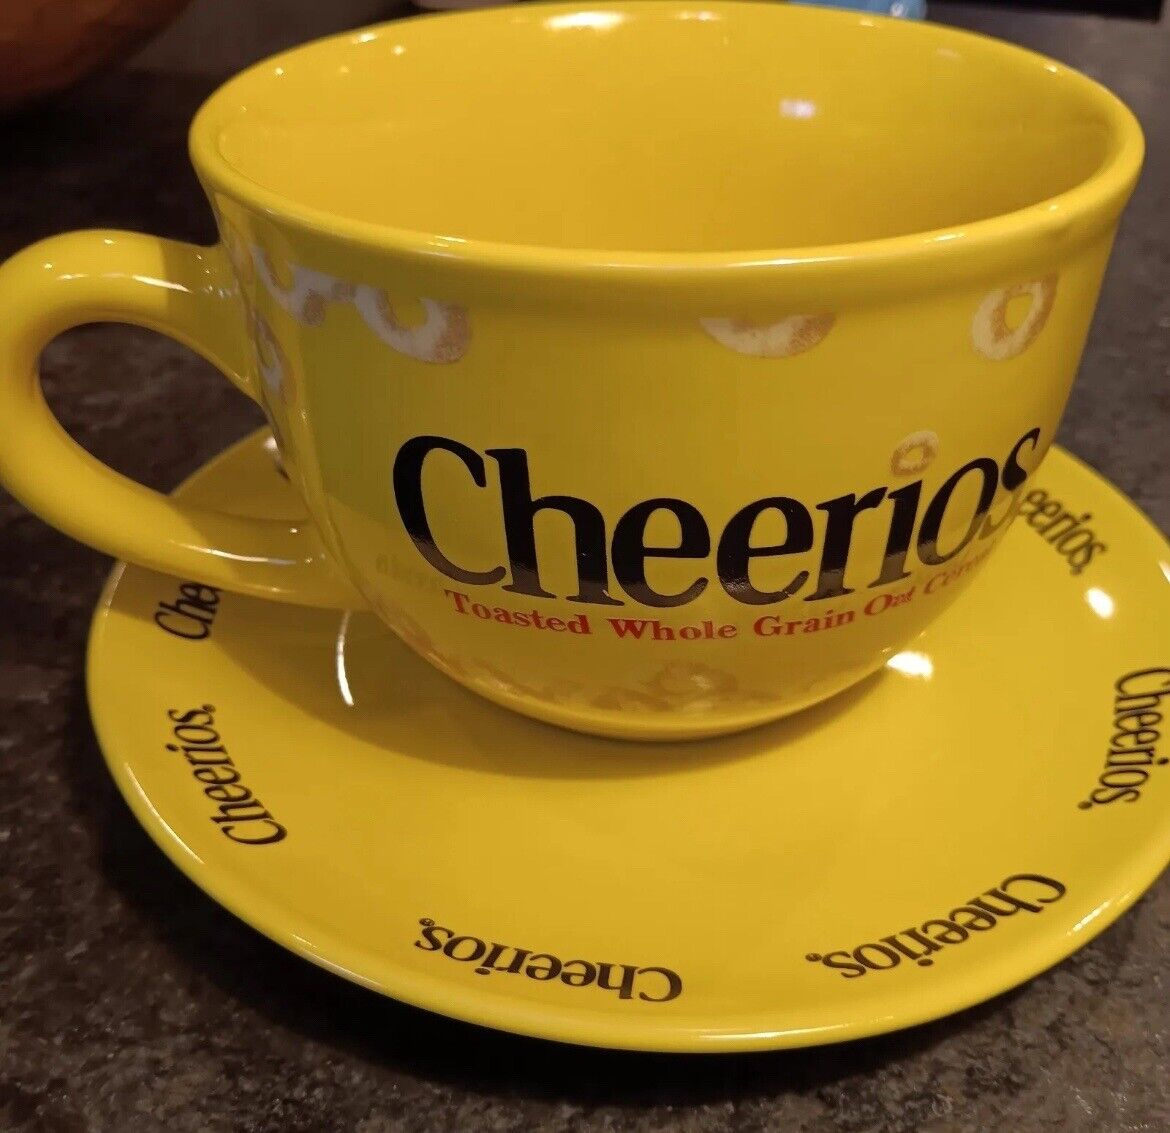 Vintage Cheerios Yellow Ceramic Cereal Bowl Mug With Saucer General Mills 2003